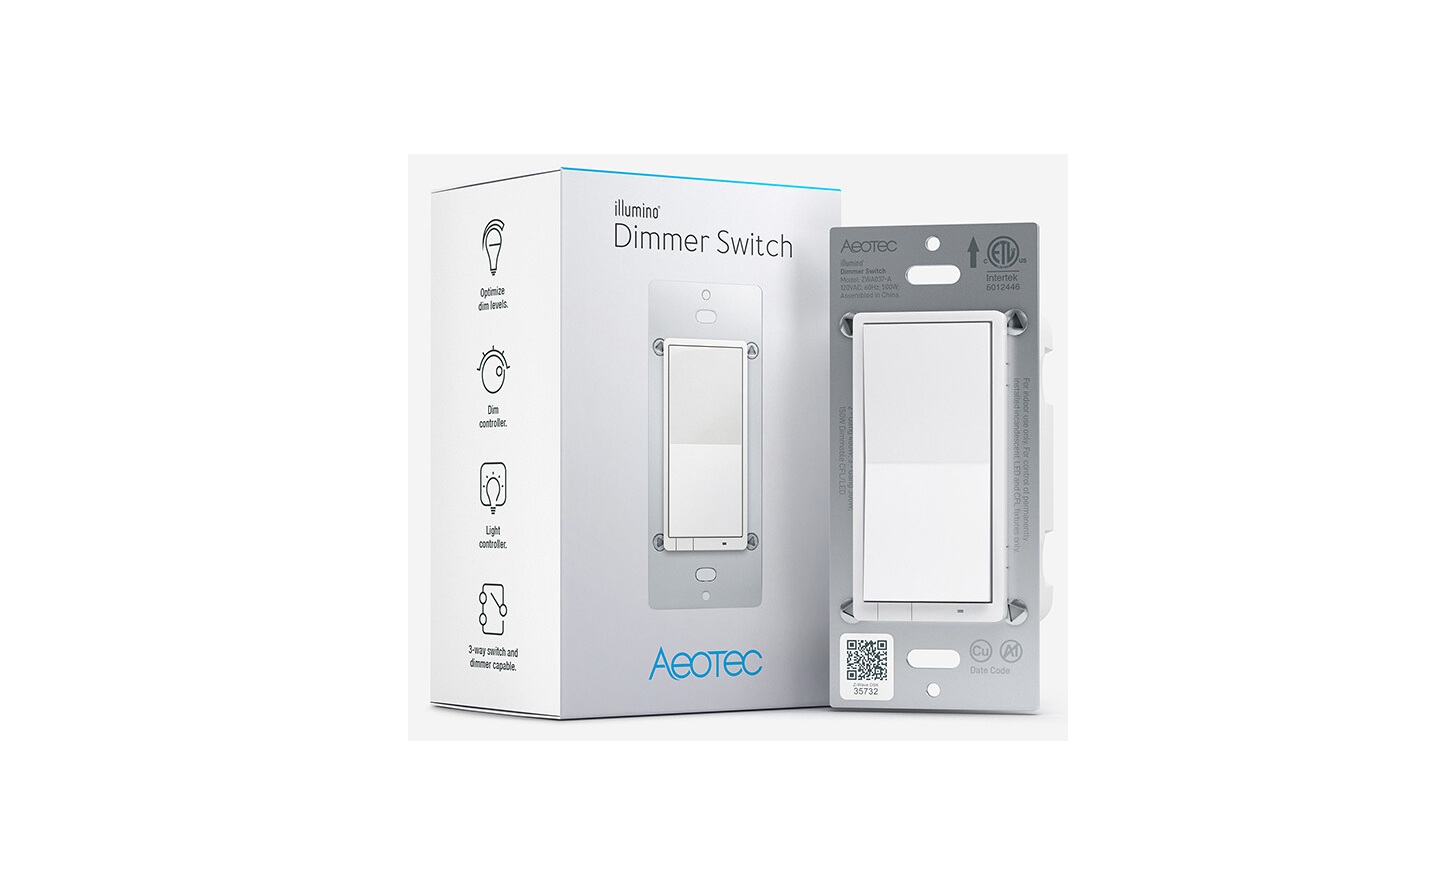 aeotec ZWA037-A Dimmer Switch User Guide